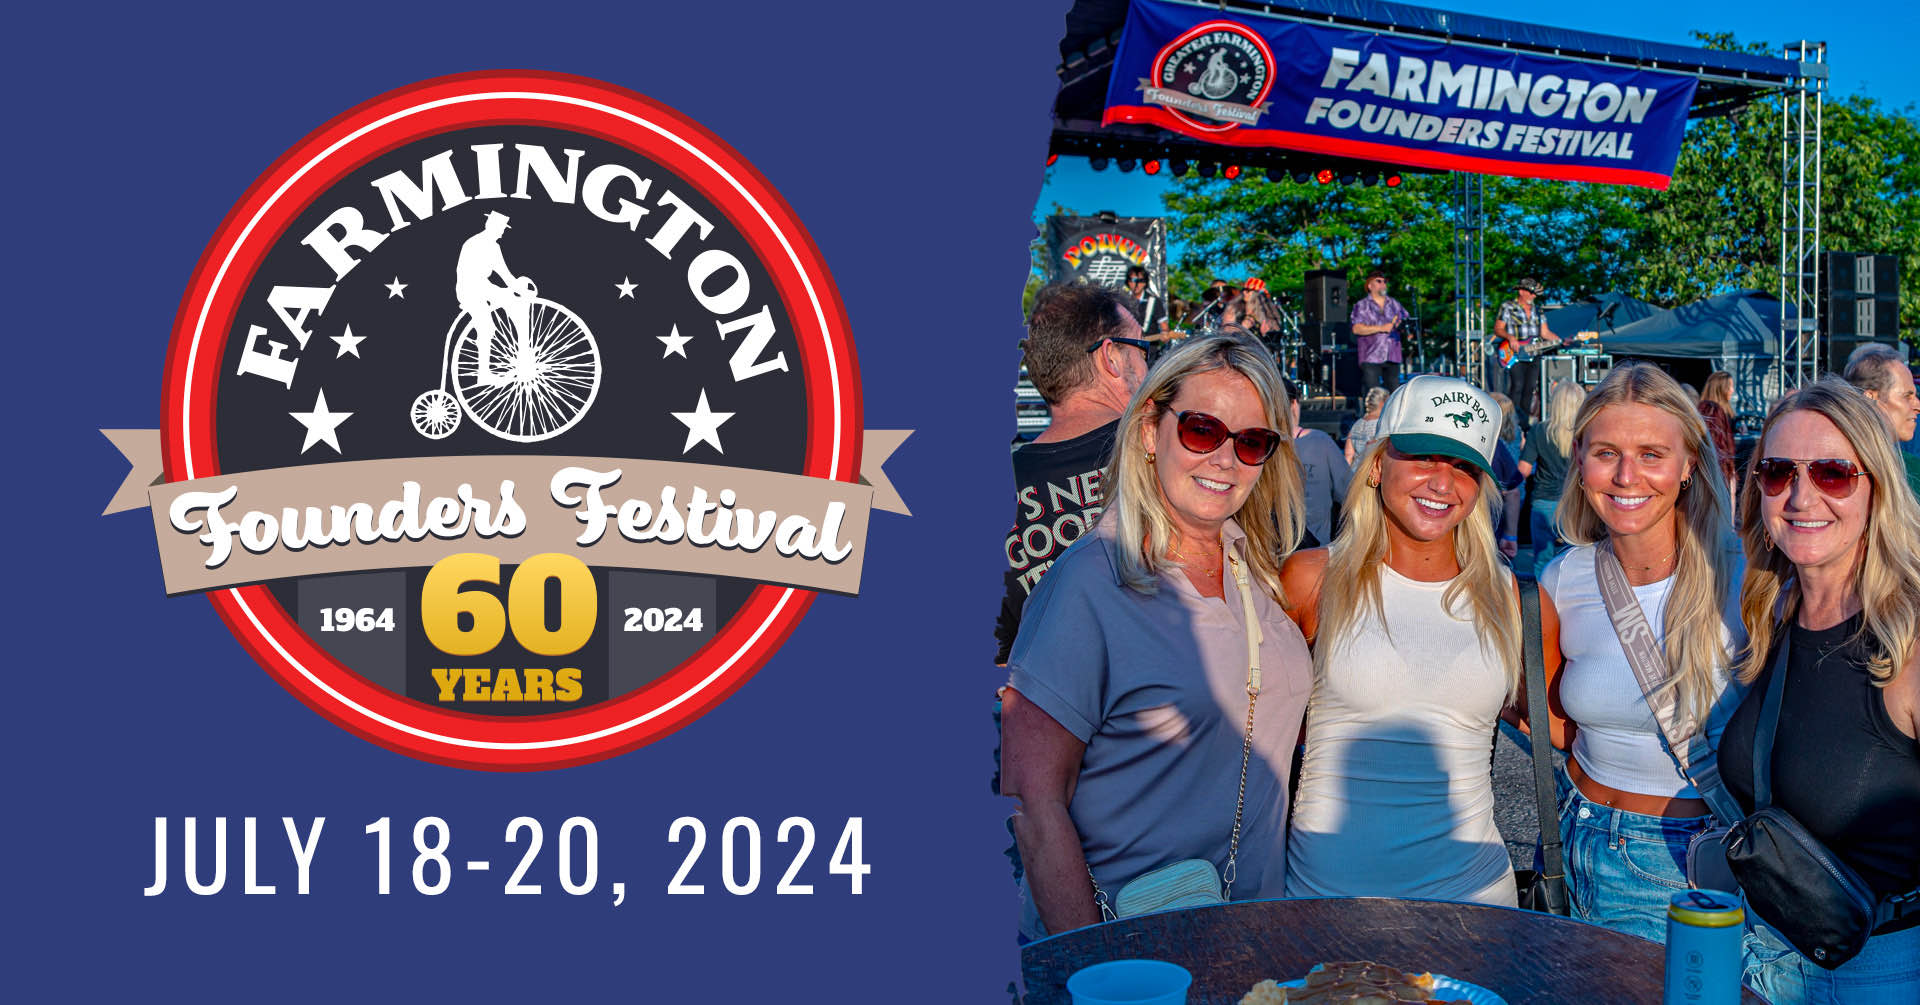 Farmington Founders Festival 60 Year anniversary; July 18 - 20, 2024; image of 4 smiling blonde haired woman in front of stage with band performing